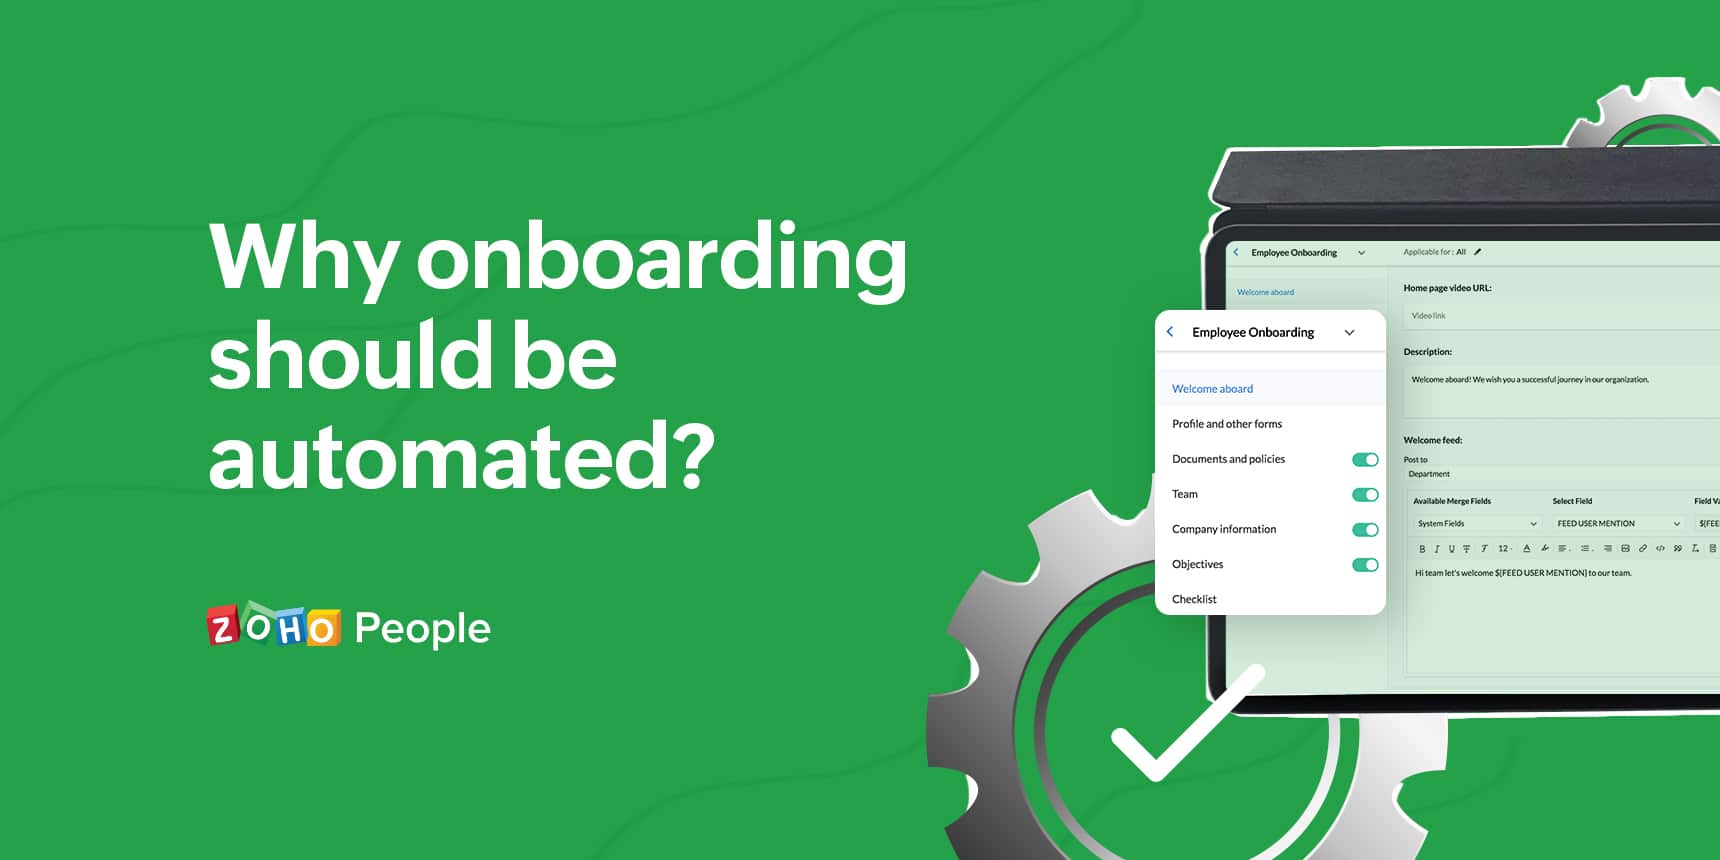 Automating onboarding